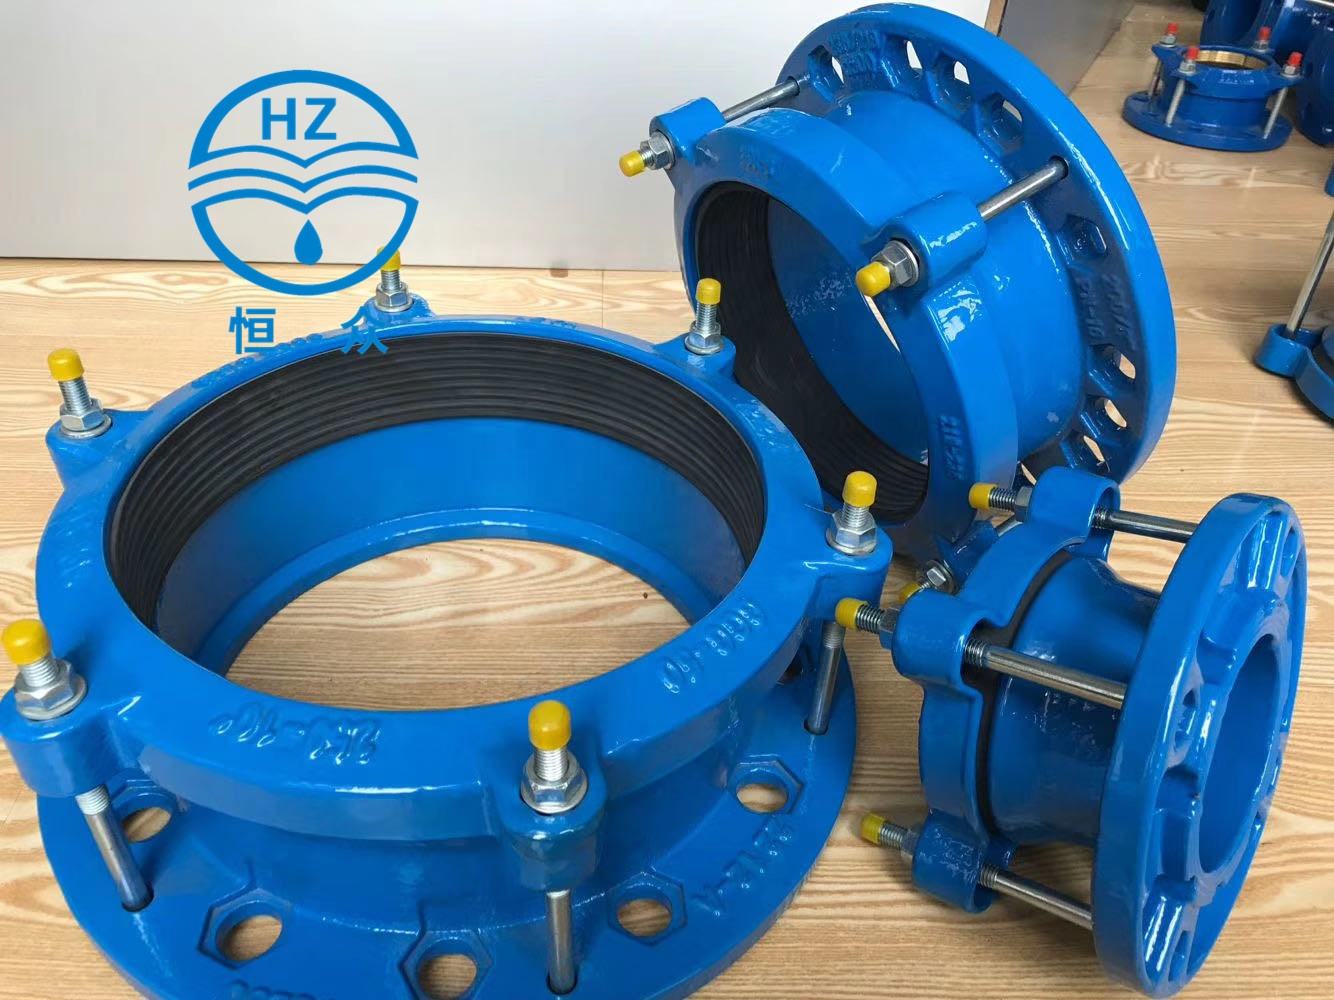 PE flange adaptor for pipe fitting